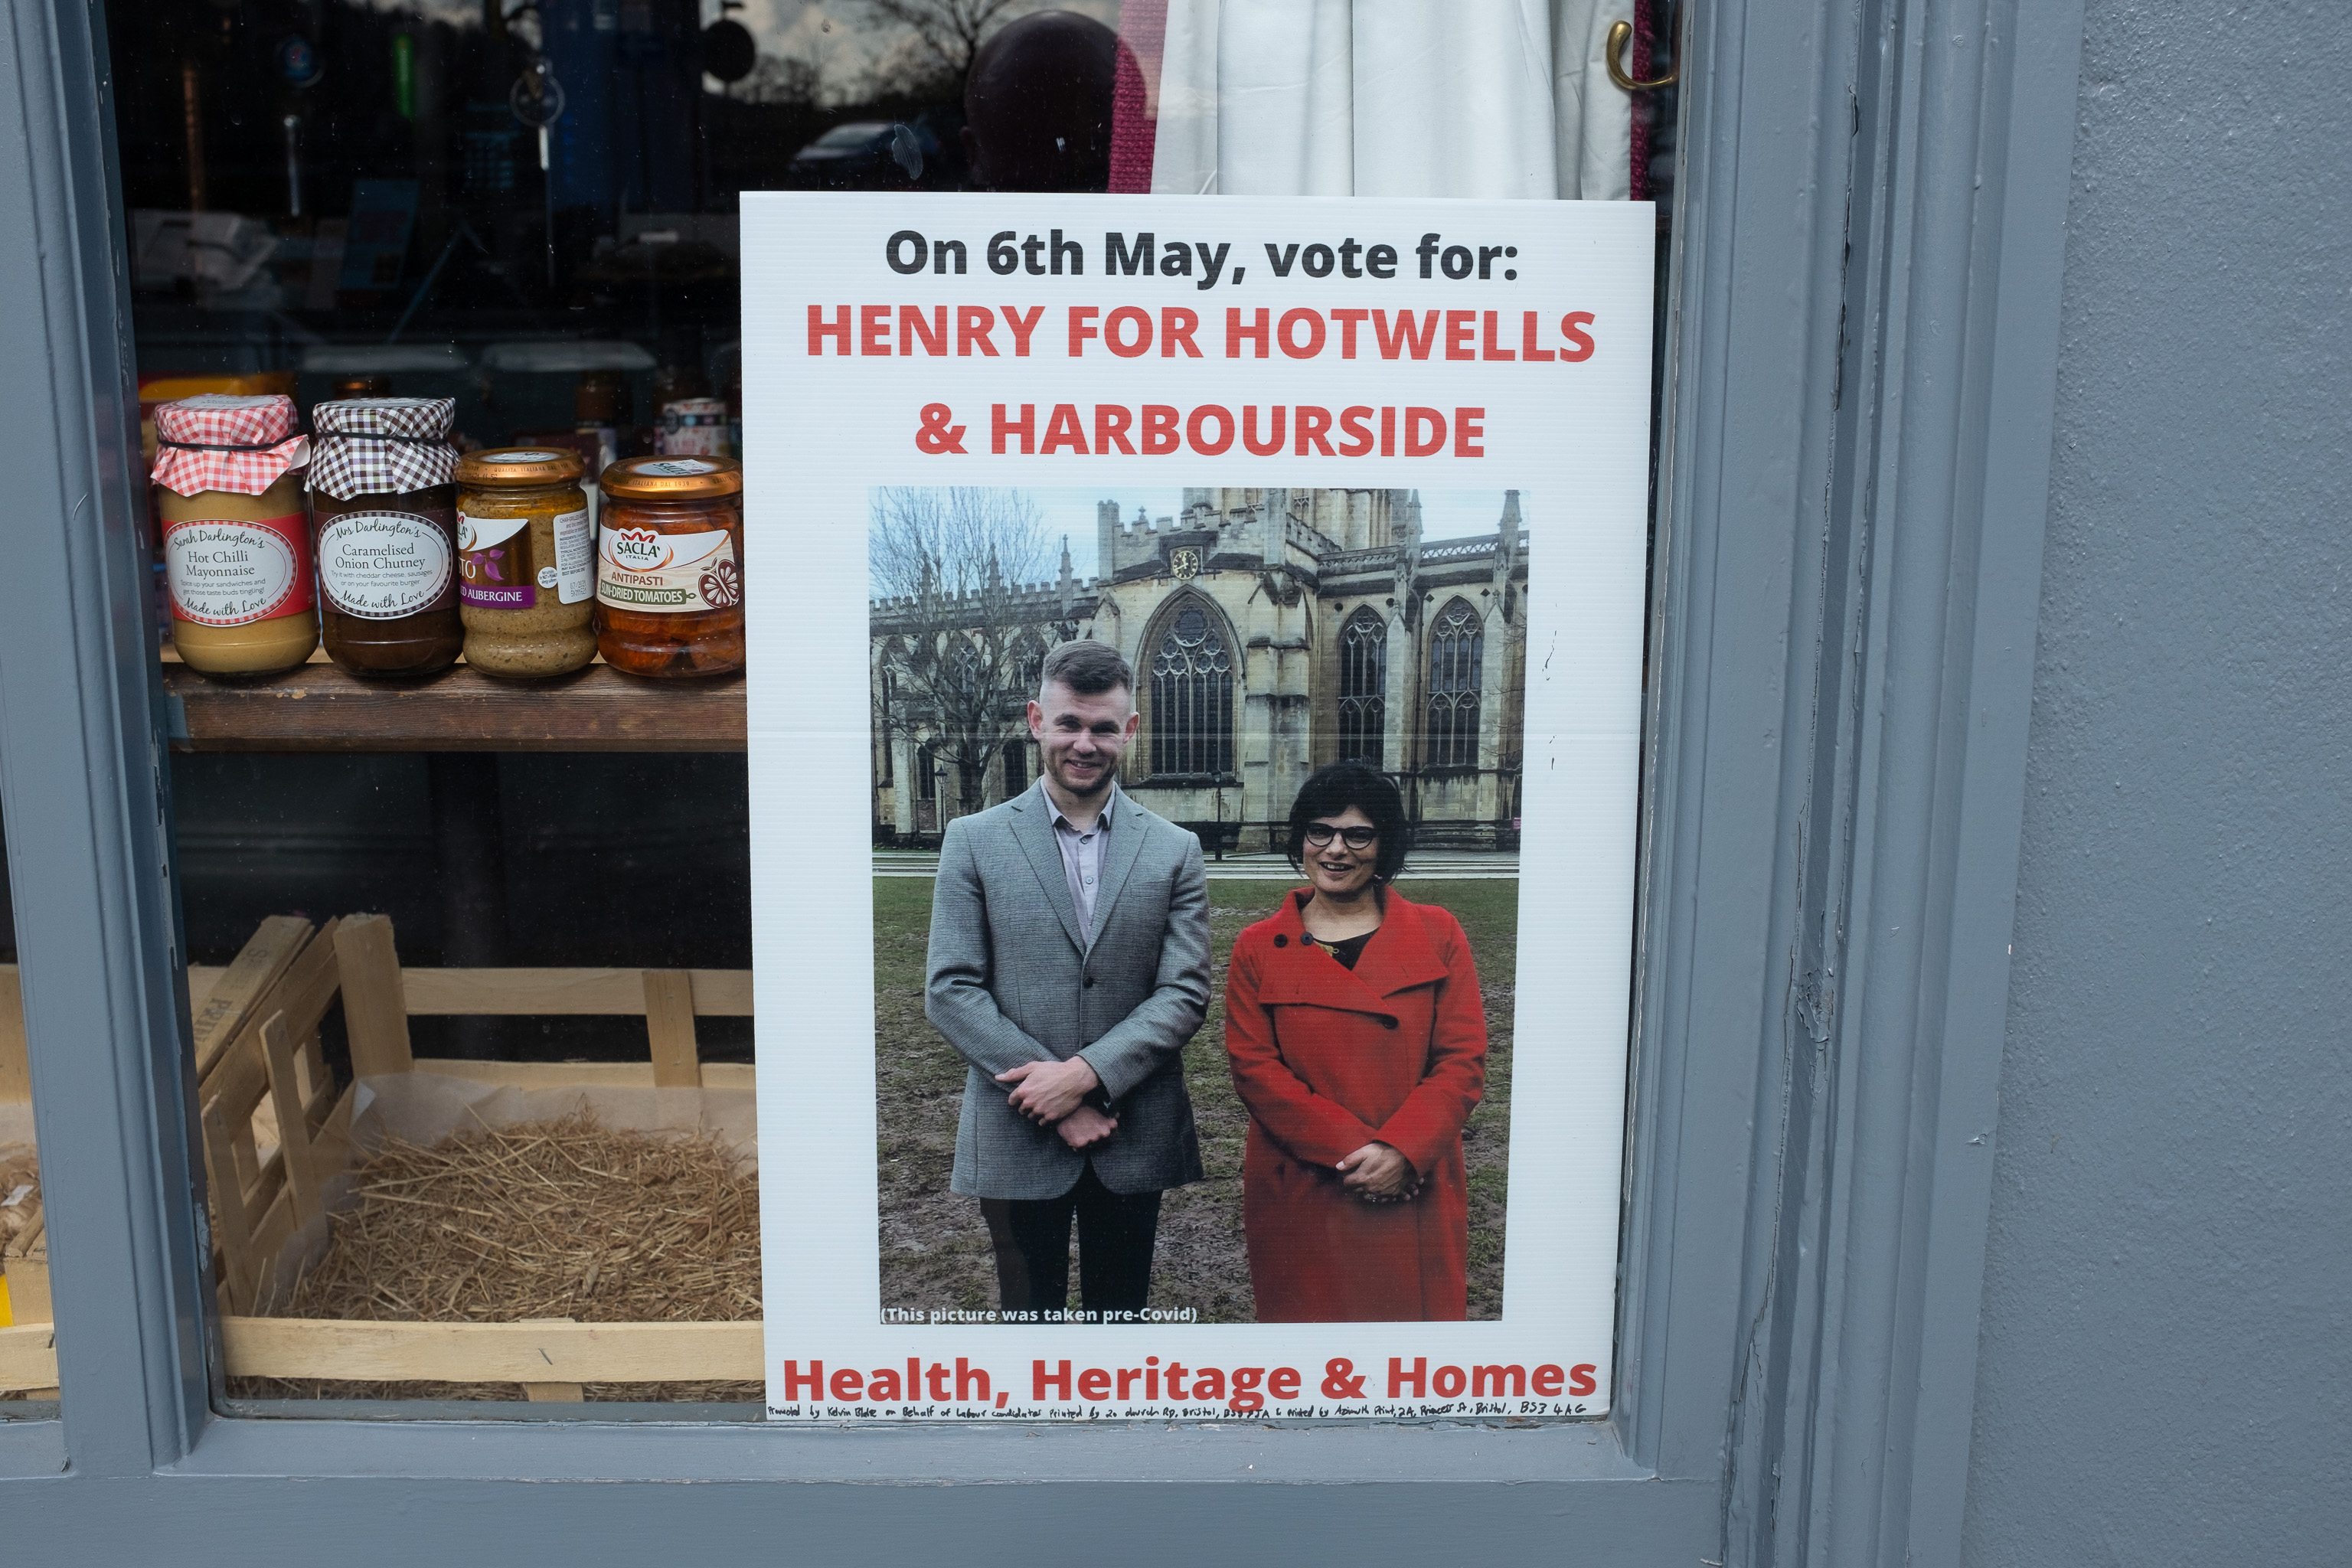 (This picture was taken pre-Covid)
On the right there, Thangam Debonnaire, our MP and Shadow Secretary of State for Housing. On the left, Henry. Apparently.
